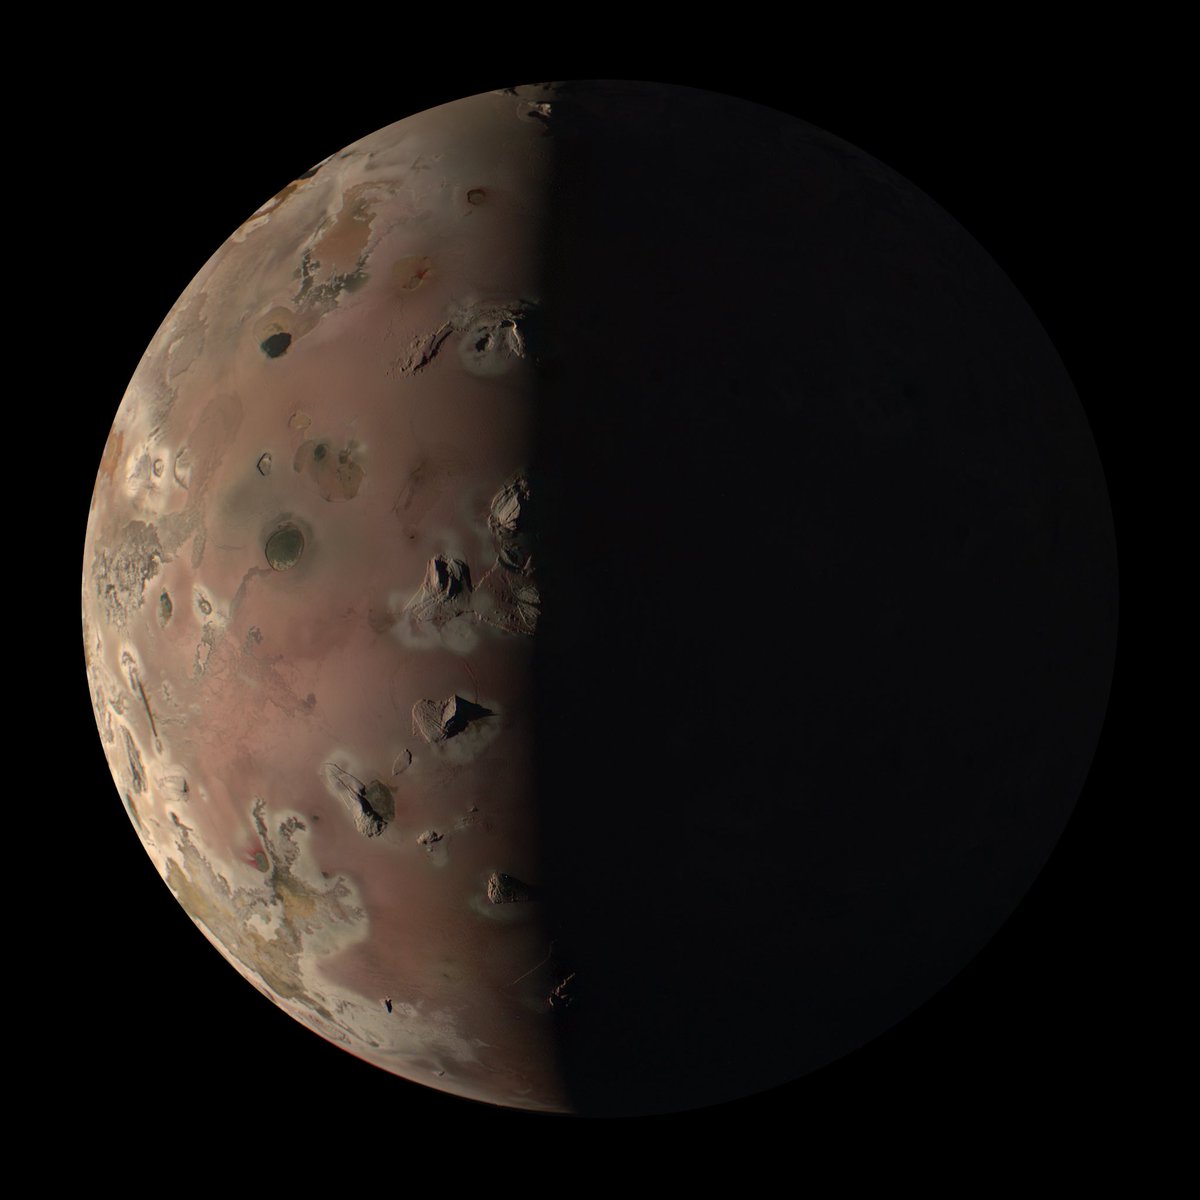 Amazing new images of the moon Io have come down from the Juno spacecraft! This one shows the volcanic moon of Jupiter from only 2,800 kilometers away, which is the closest look we’ve gotten of Io for over 20 years ago. NASA/JPL-Caltech/SwRI/MSSS/Kevin M. Gill